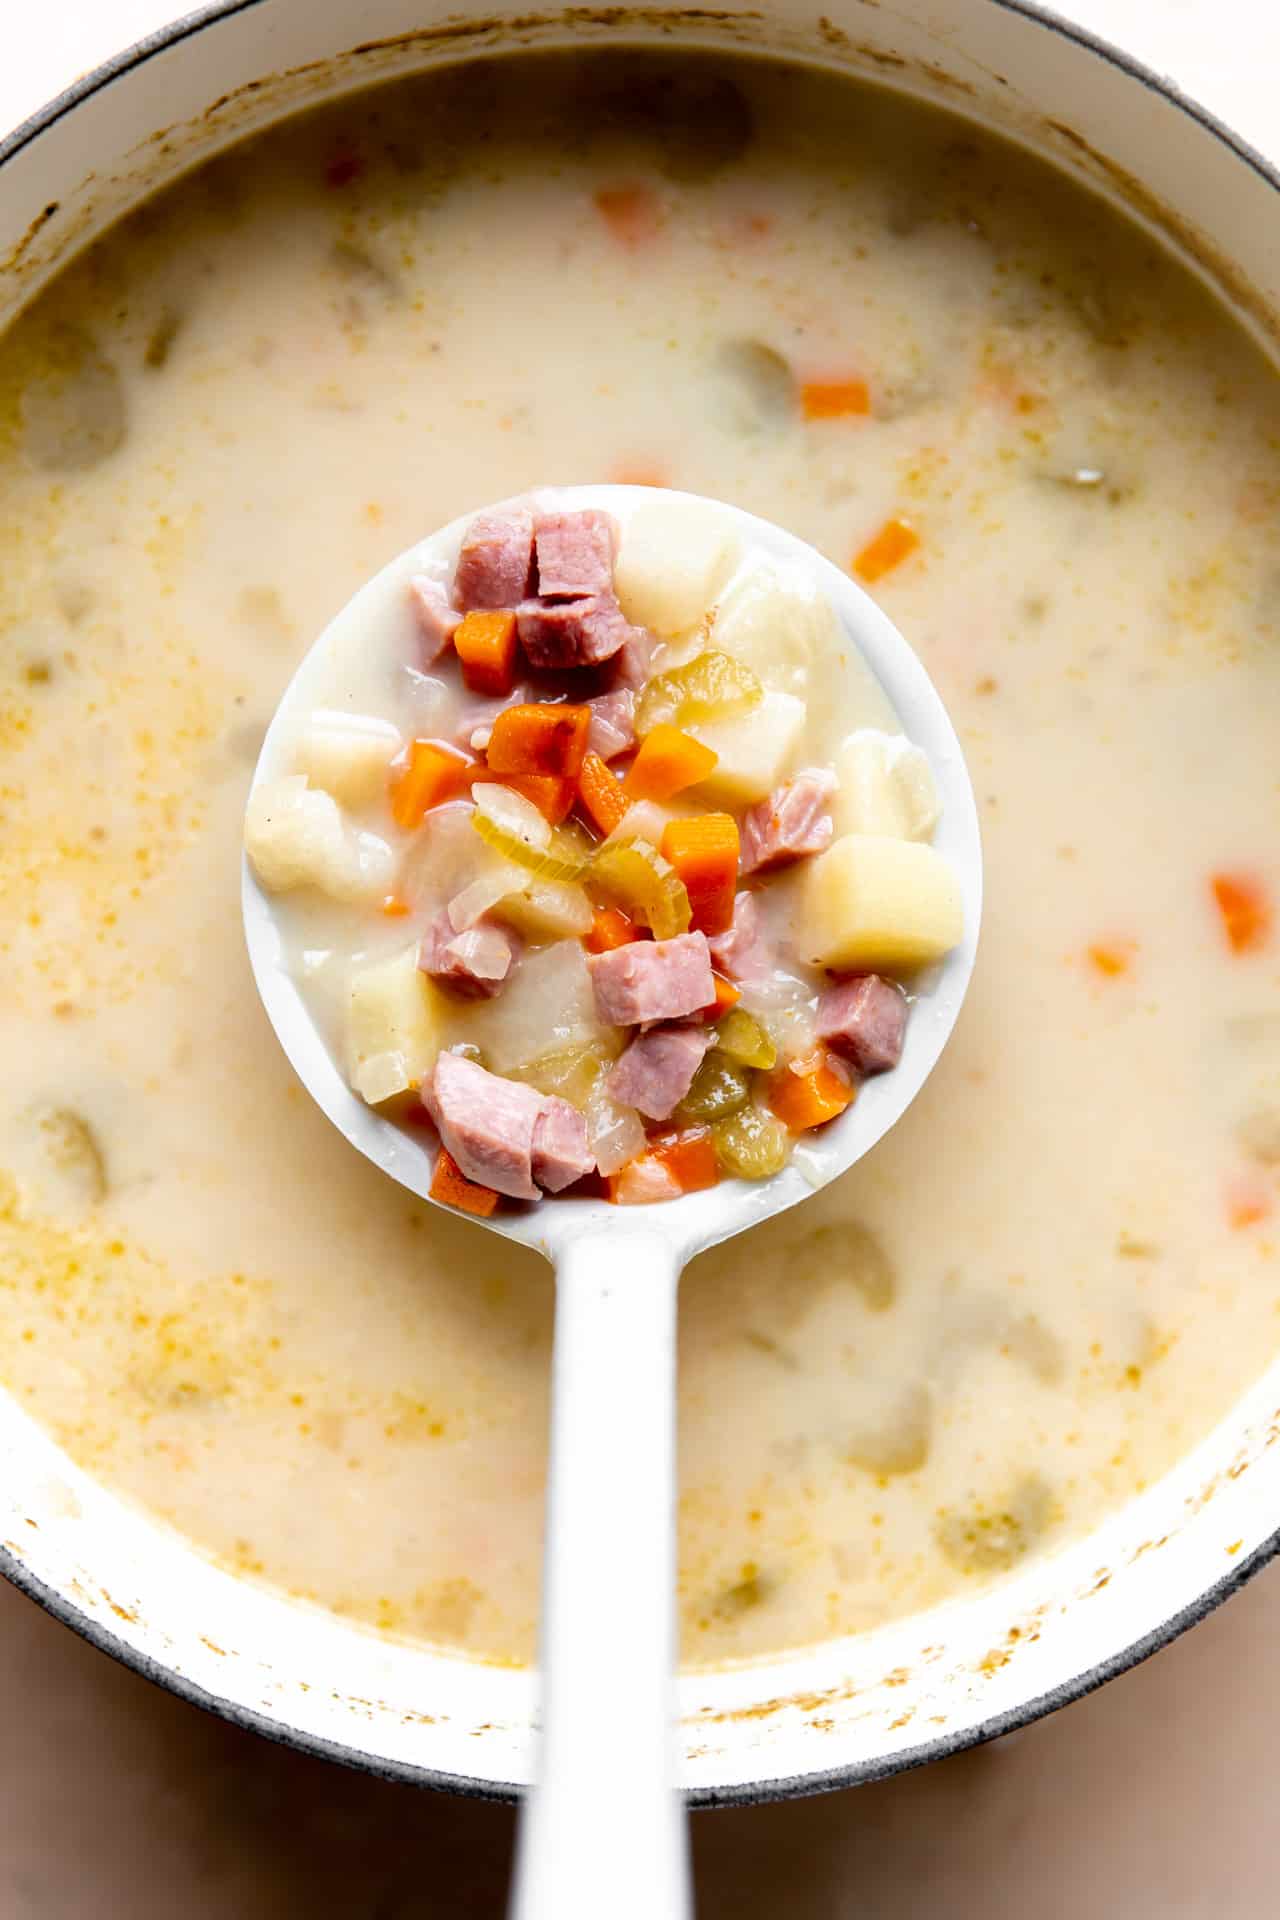 Spoon ladling up ham bone soup with bits of ham, potato and veggies in a creamy broth.